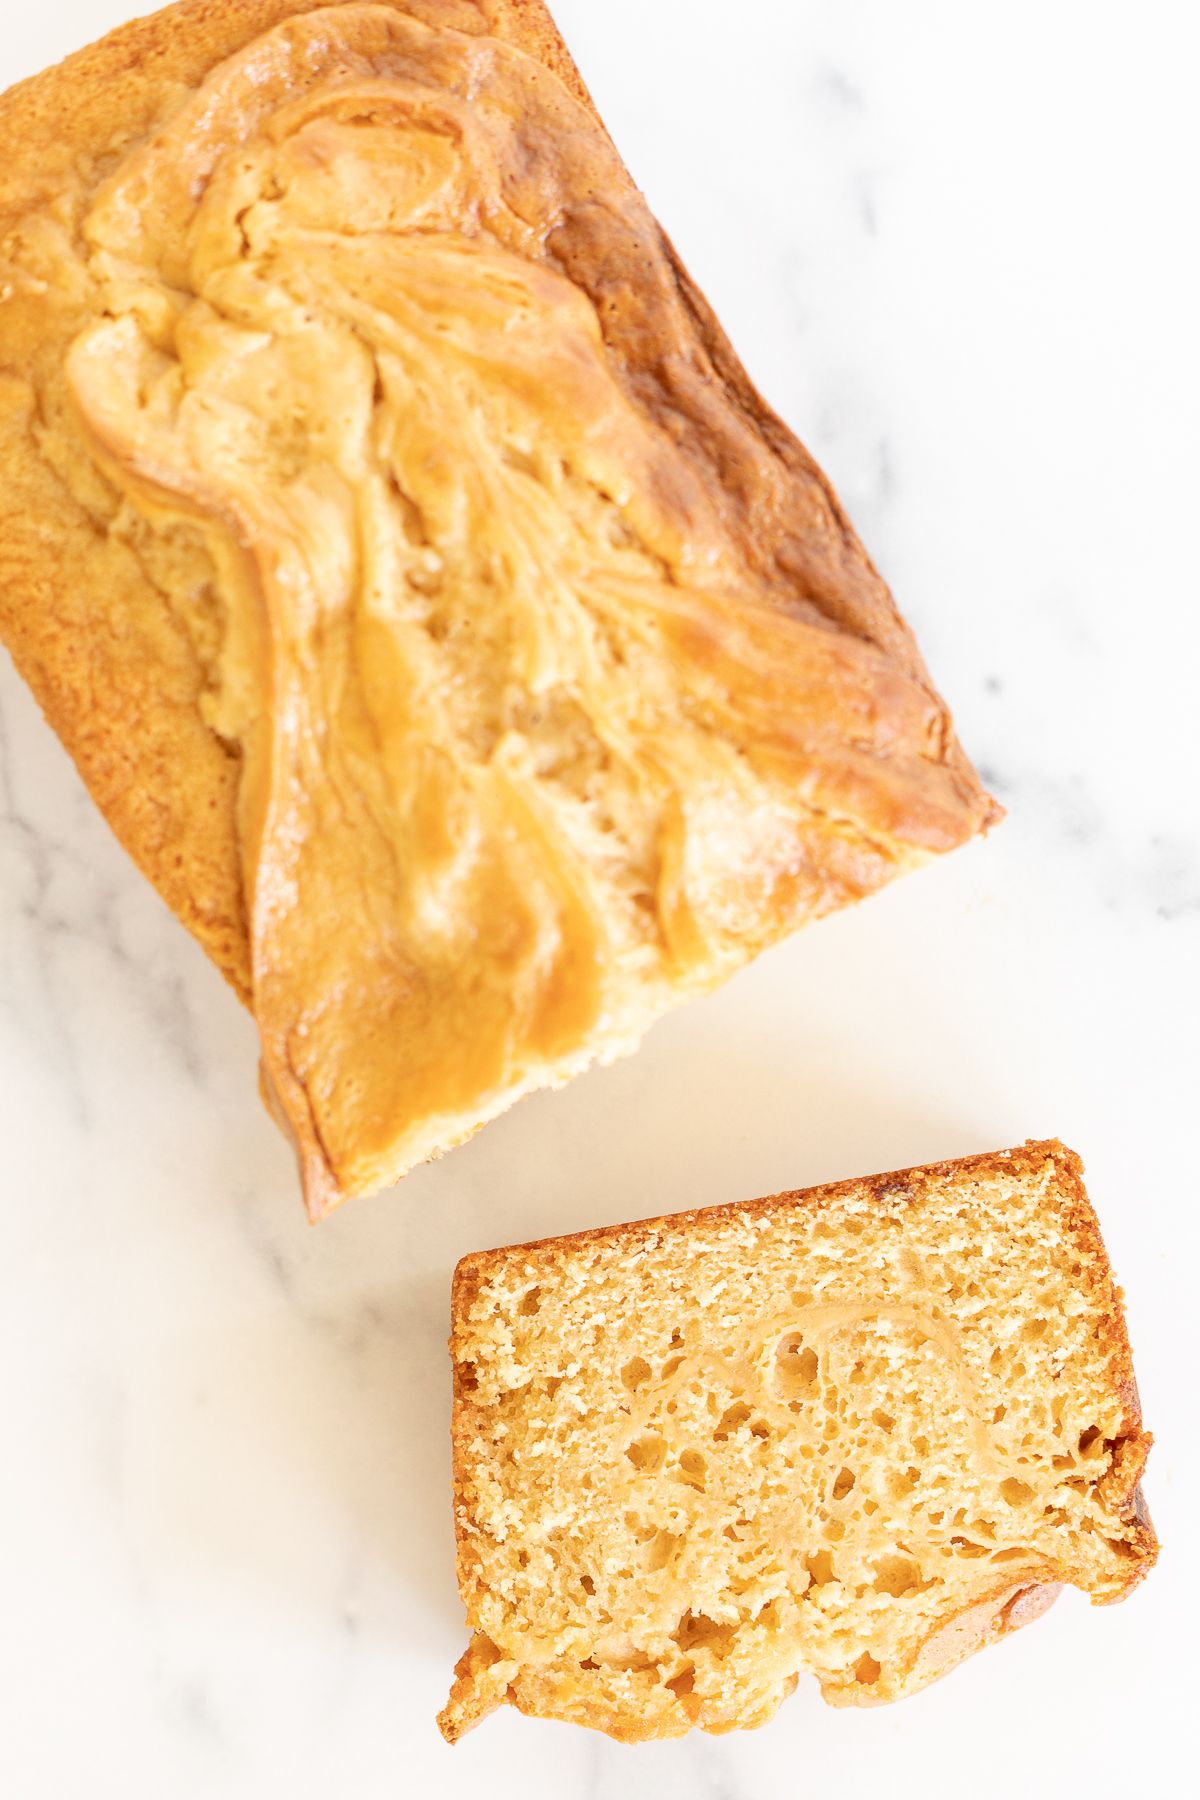 Cream Cheese Bread with Caramel